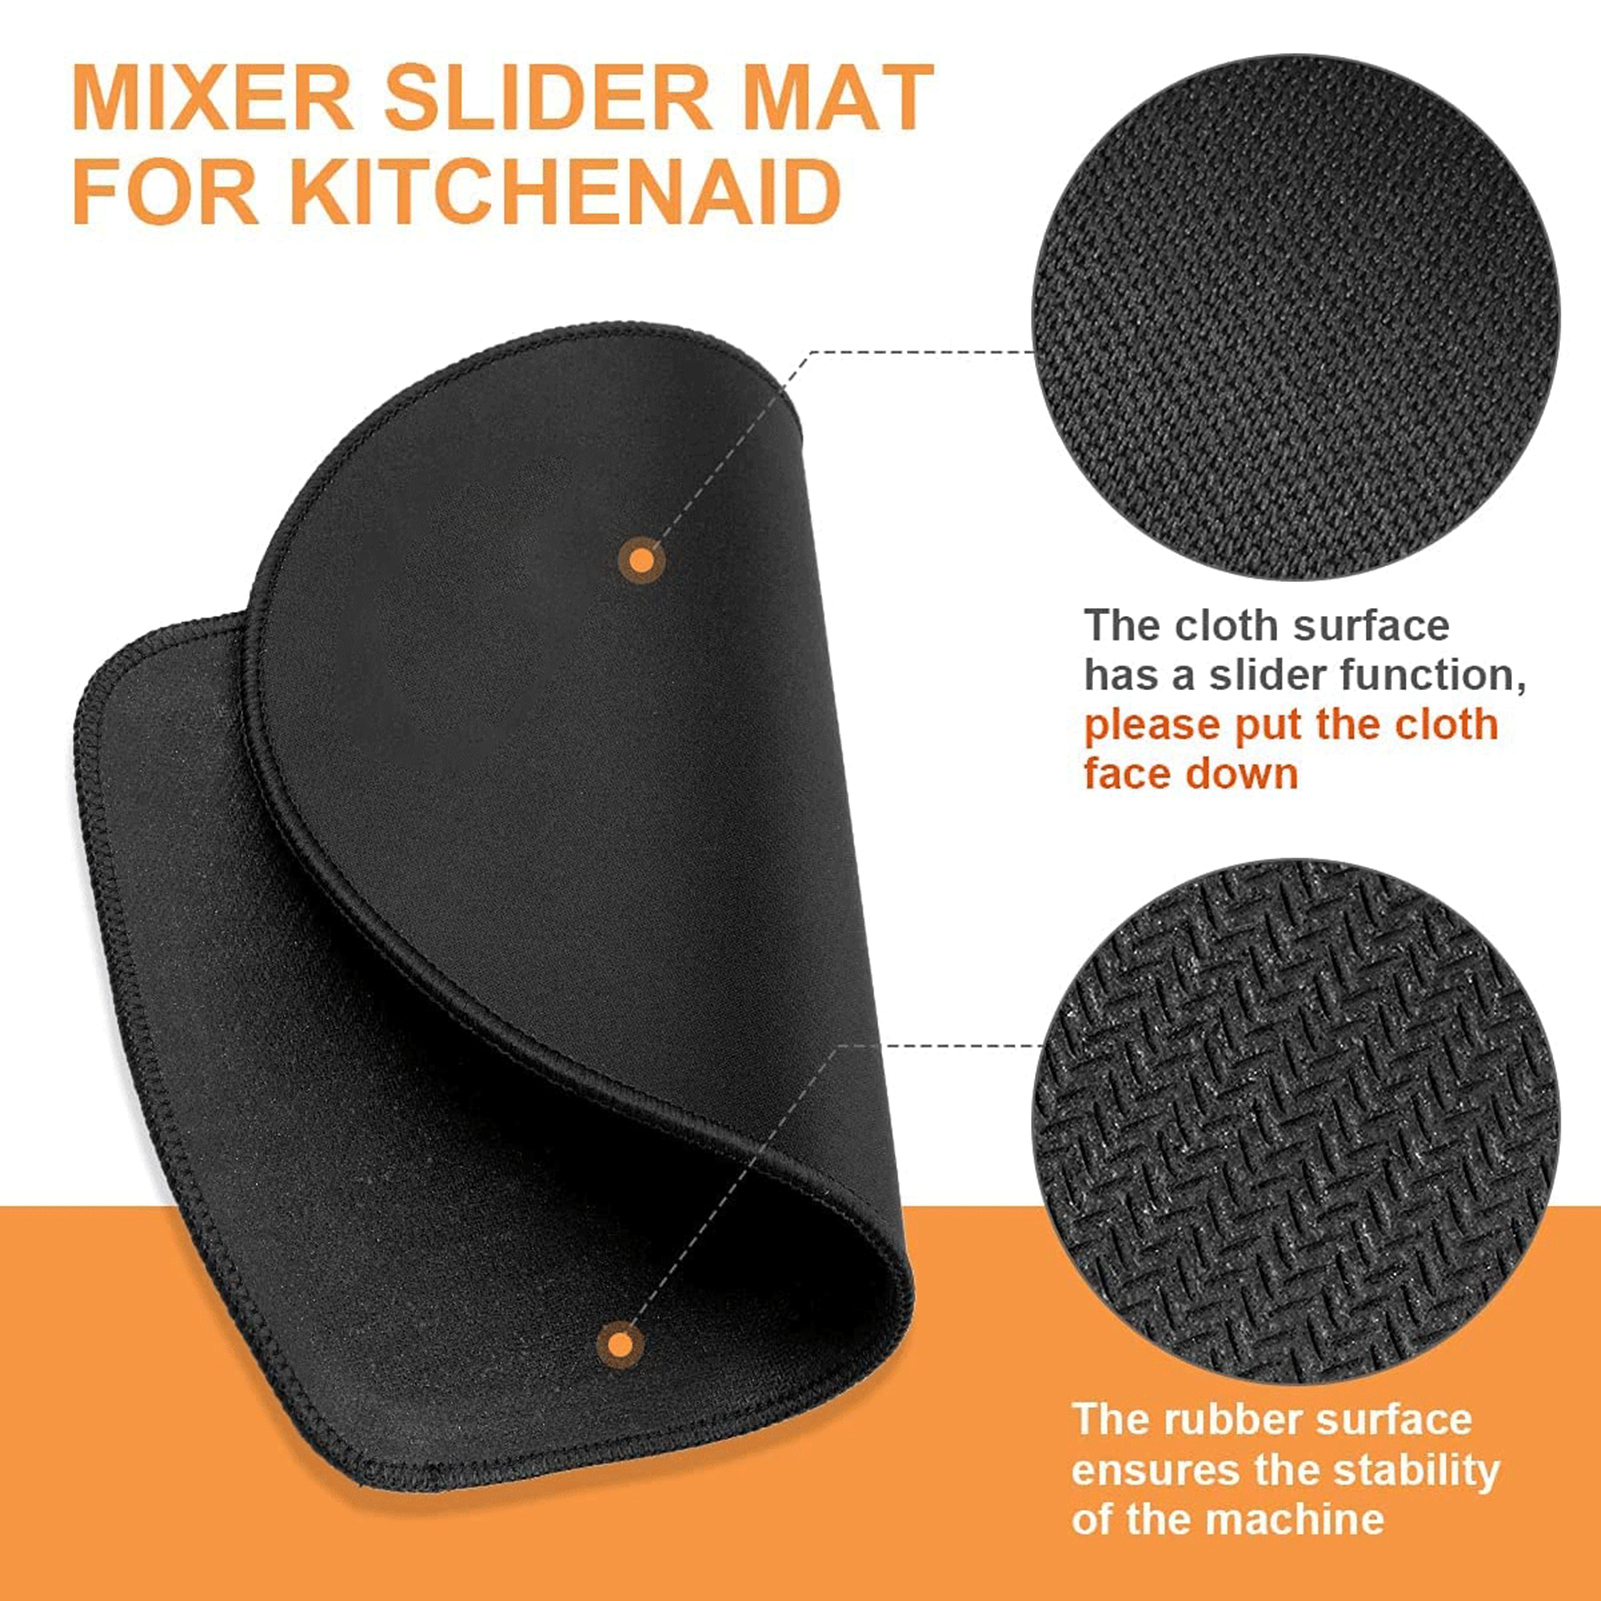 Travelwant Mixer Mover for Stand Mixer Mixer Slider Mat Kitchen Appliance Mats Compatible with 4 5 5 Qt Tilt Head Stand Mixer Artisan Tilt Head Mixer - image 4 of 6